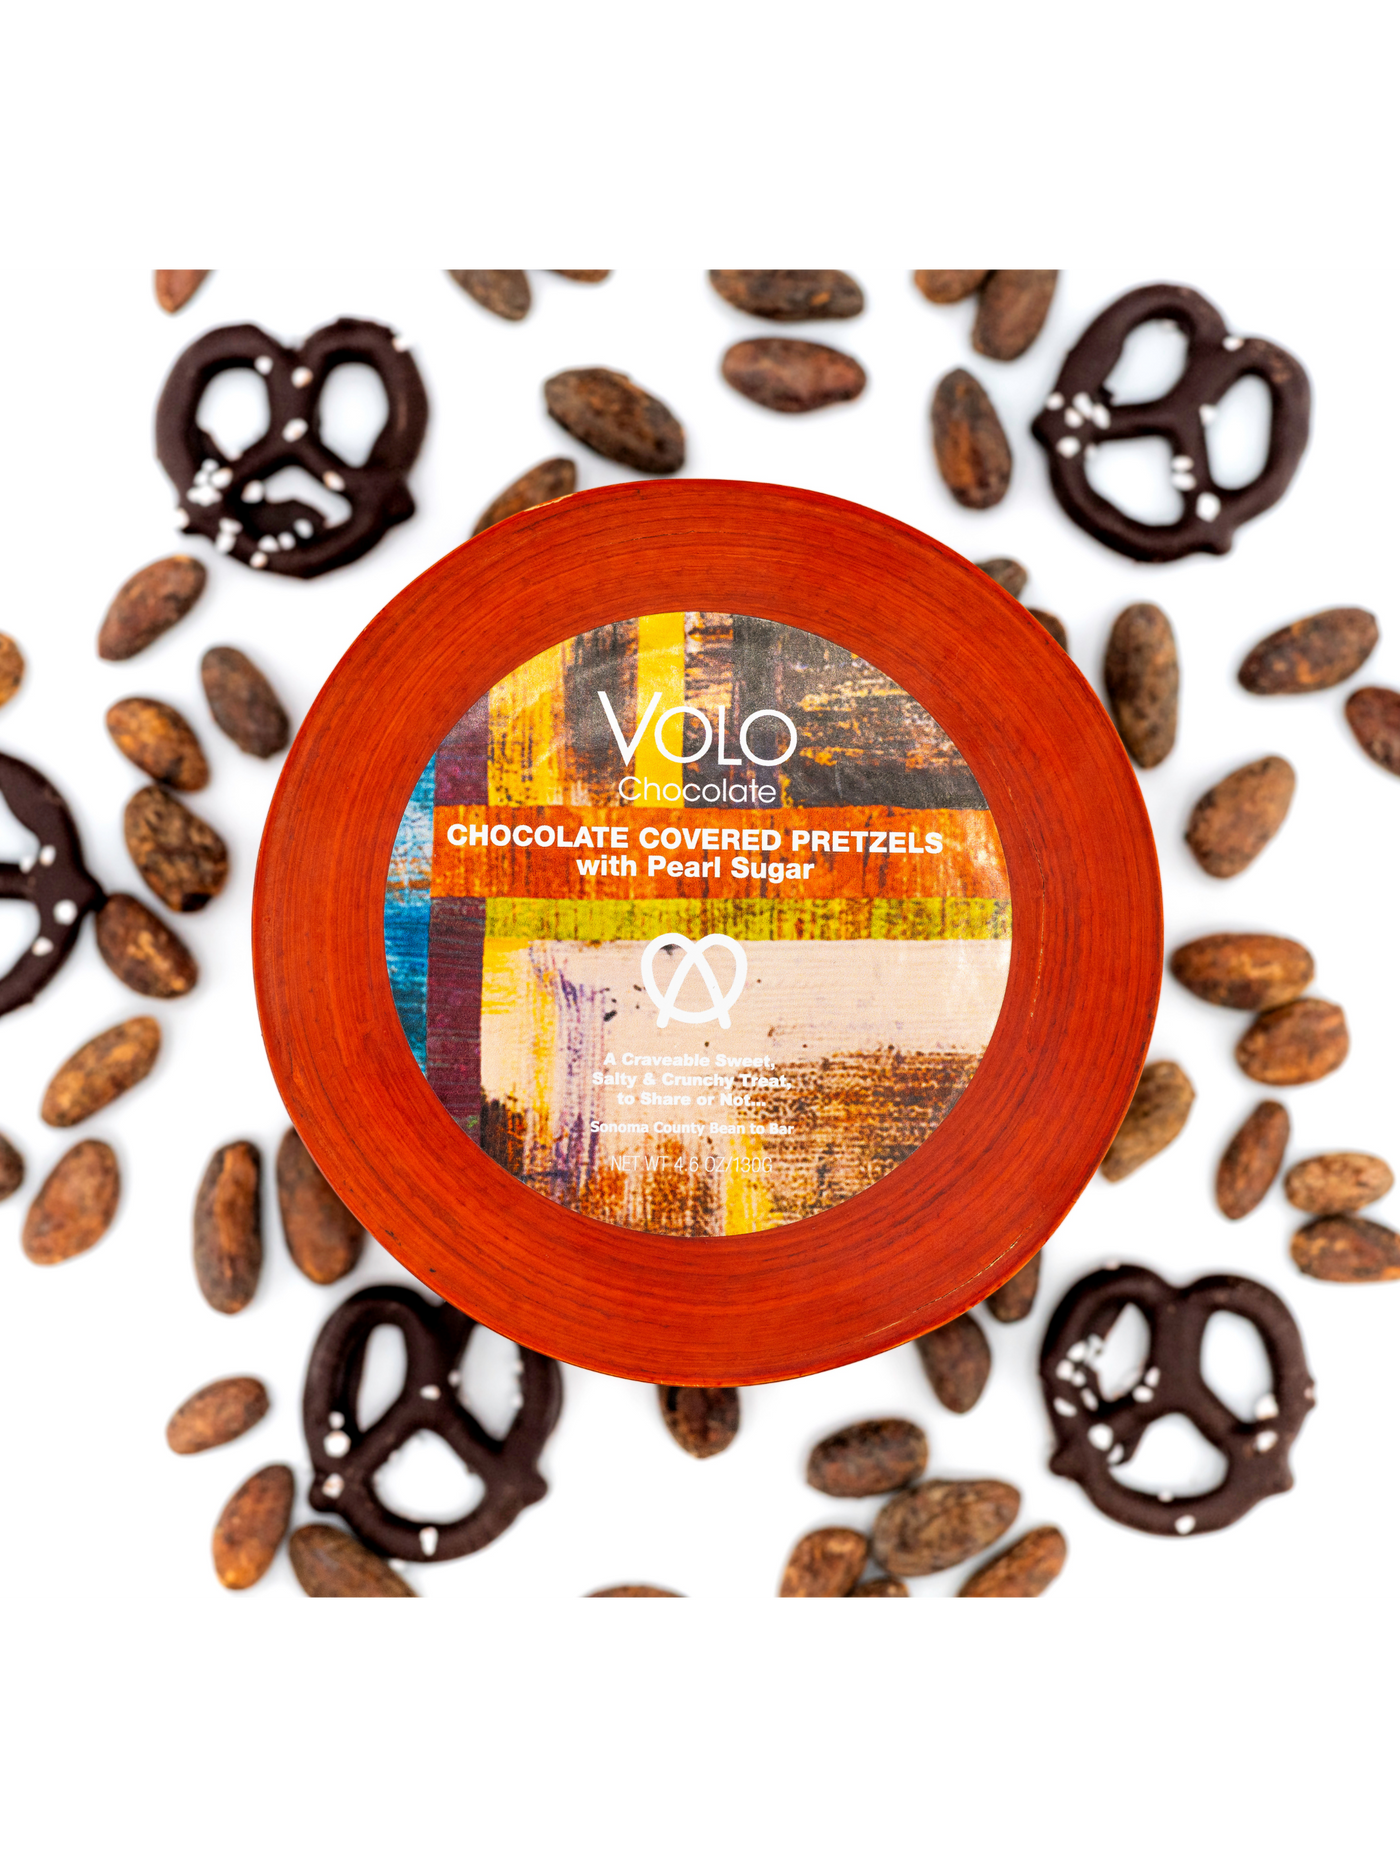 VOLO Chocolate Covered PRETZELS with Pearl Sugar